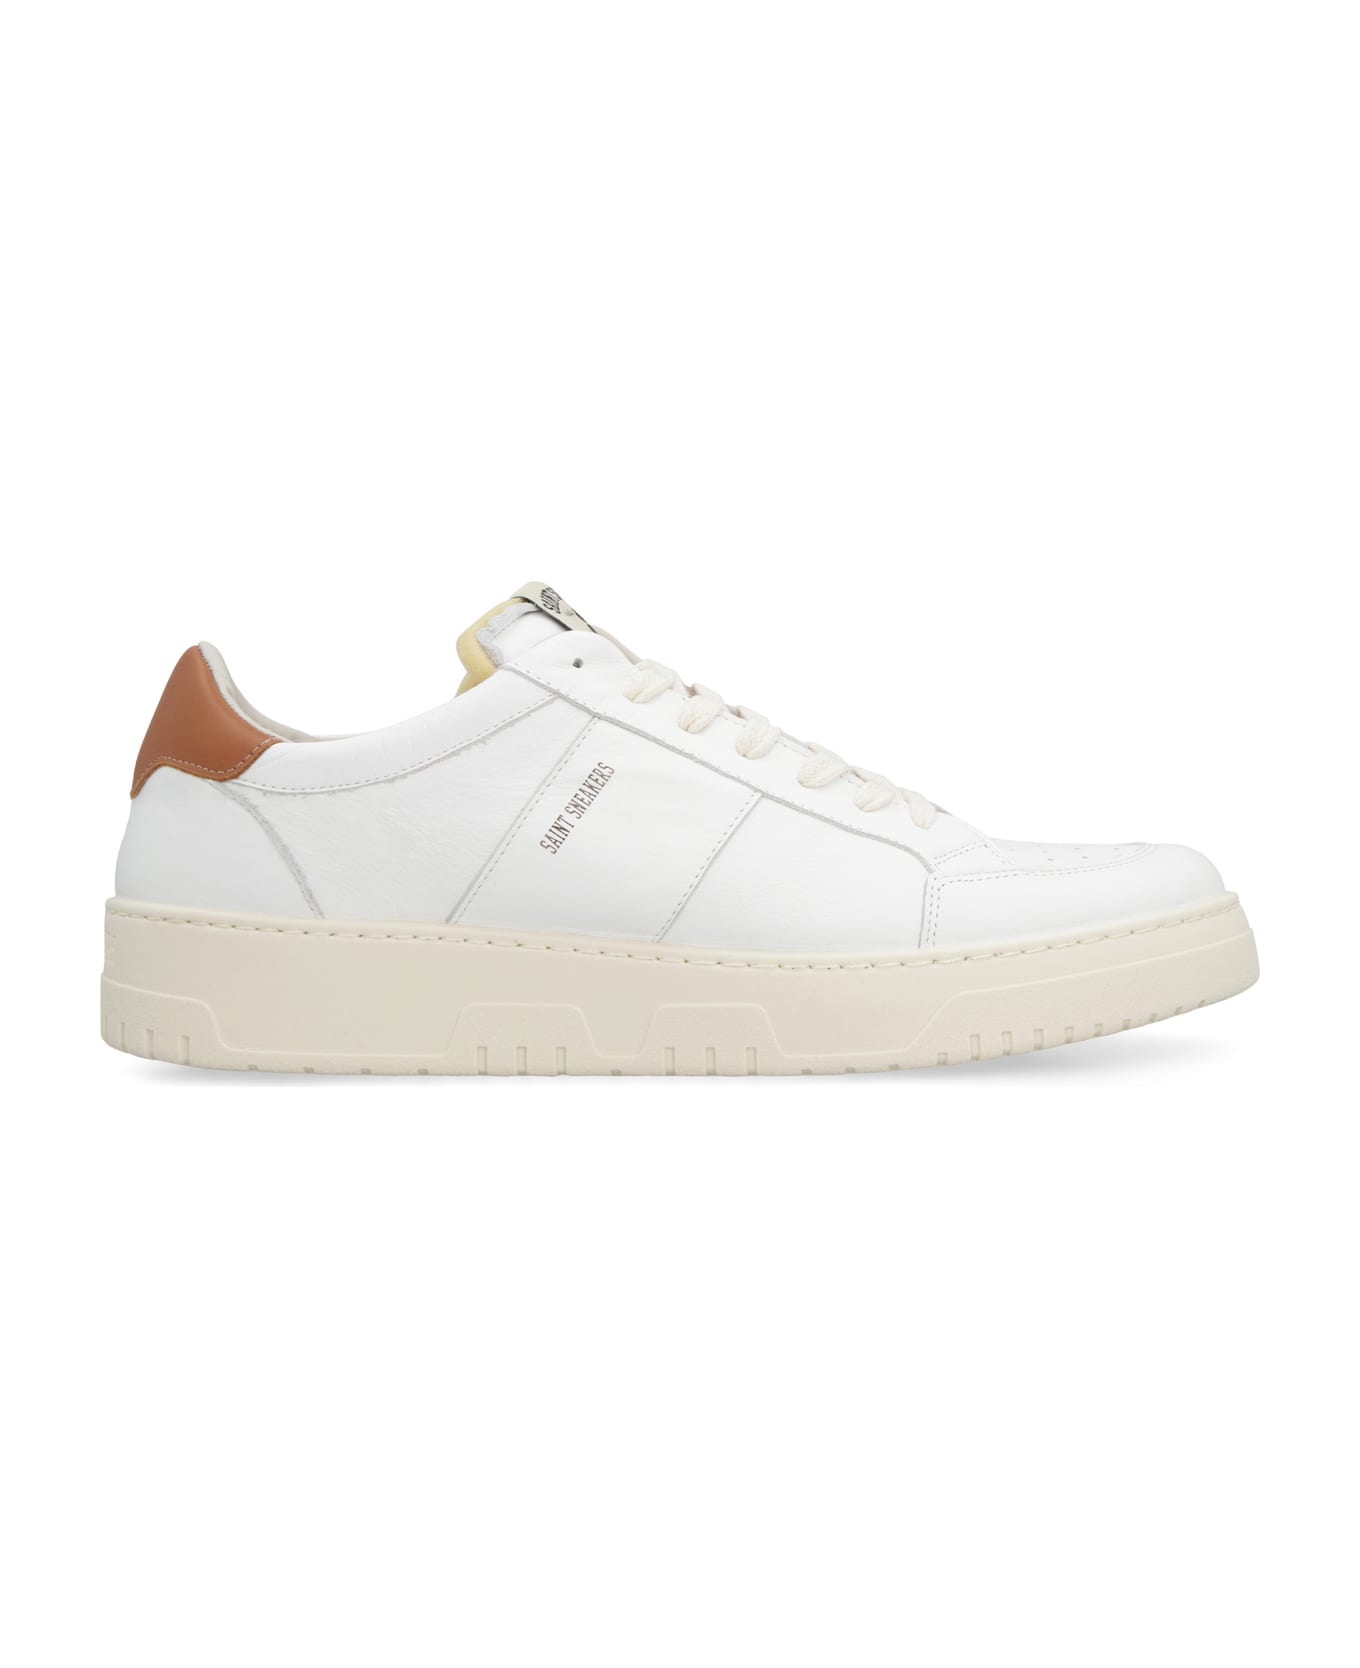 Saint Sneakers Golf Leather Low-top Sneakers - White/brown スニーカー